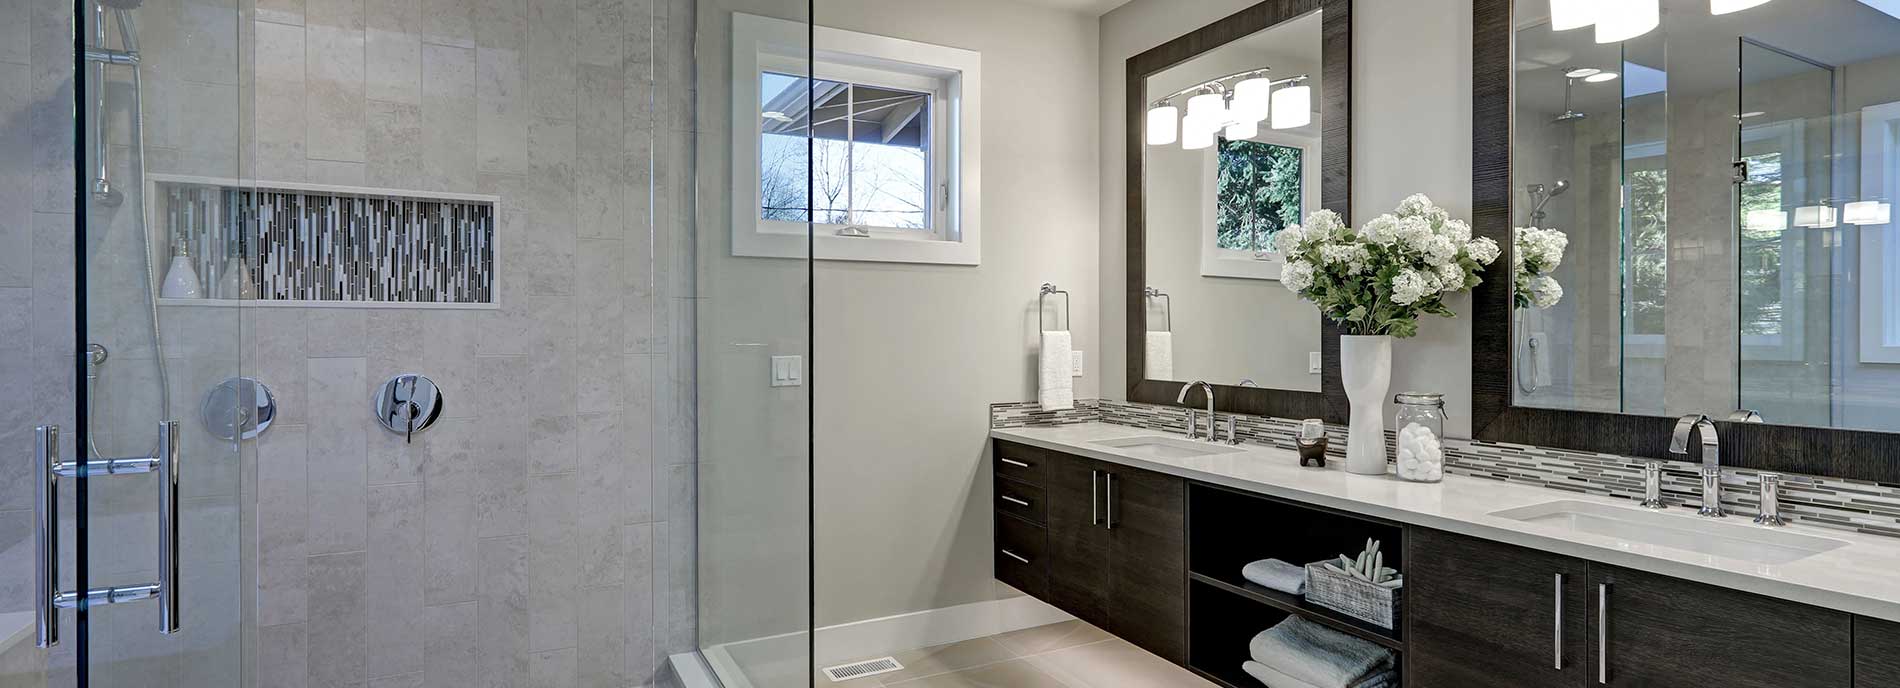 Glass shower and bathroom vanity with large mirrors